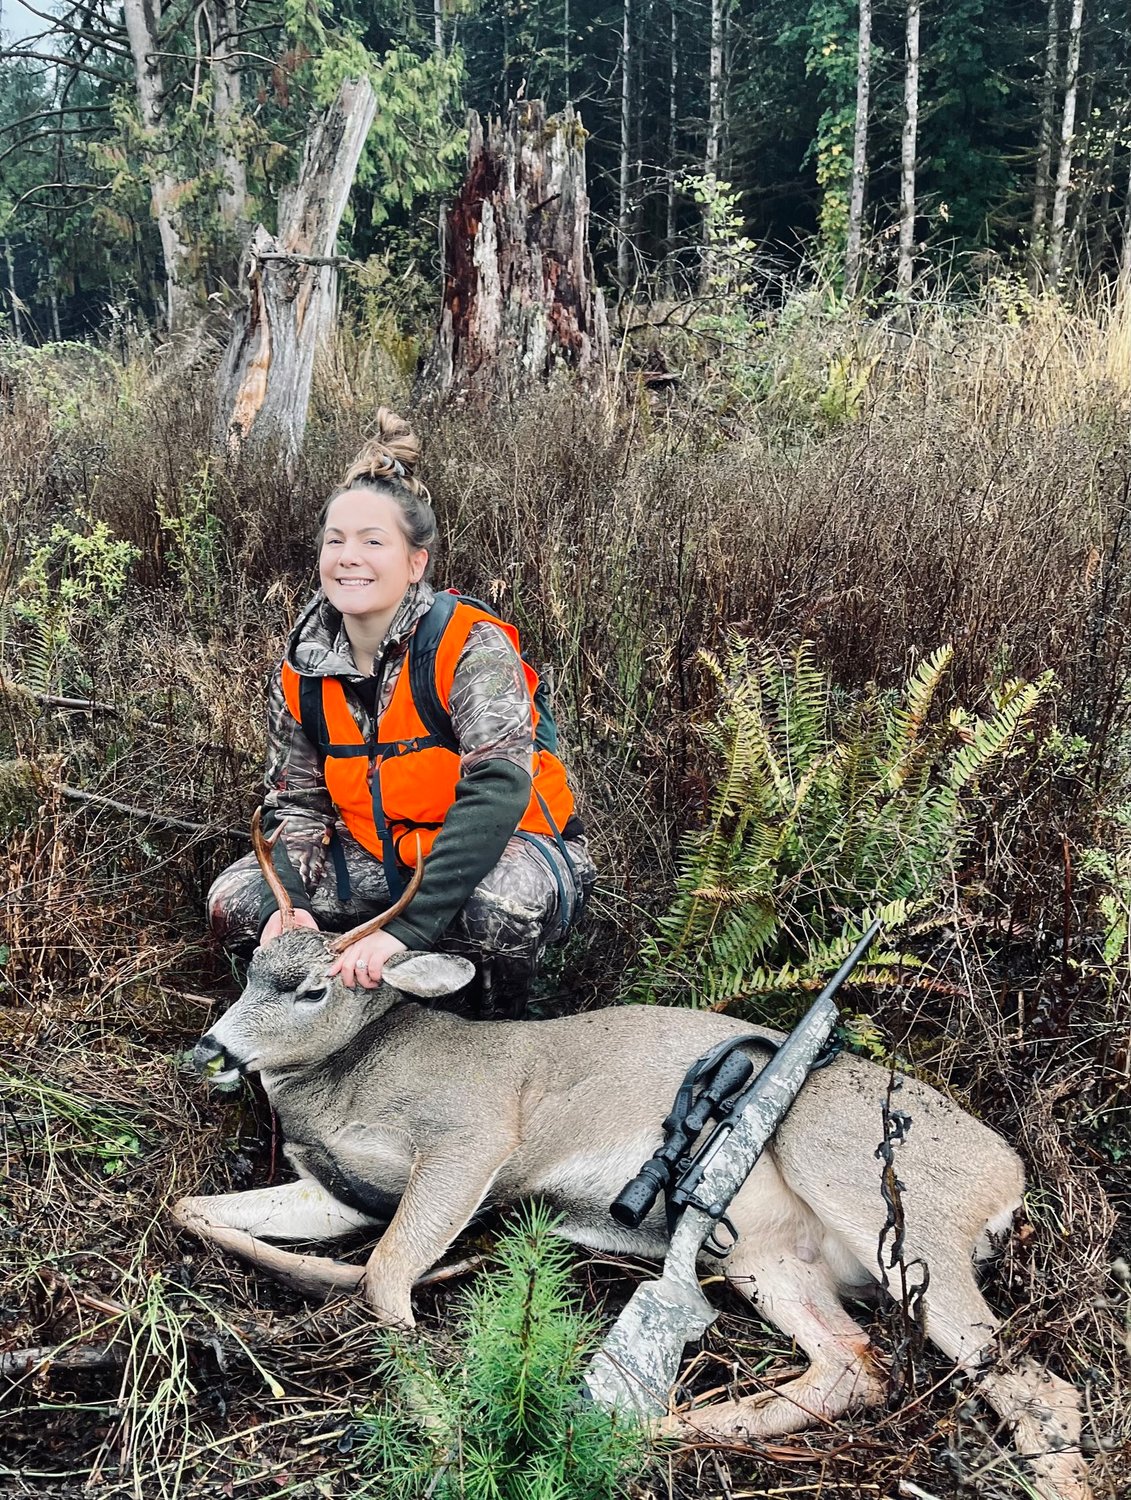 "My name is Kristina Snodgrass! This was killed in Lewis County on Oct. 25. I'm beyond grateful for this opportunity to be able to provide for my family. I got into hunting about seven years ago thanks to my husband Abraham. He has always been by my side and has taught me everything there is to know about hunting. It's a very rewarding, awesome feeling to be able to get one down and it’s definitely our favorite sport we look forward to each year. Also wanted to wish those out there good luck!"